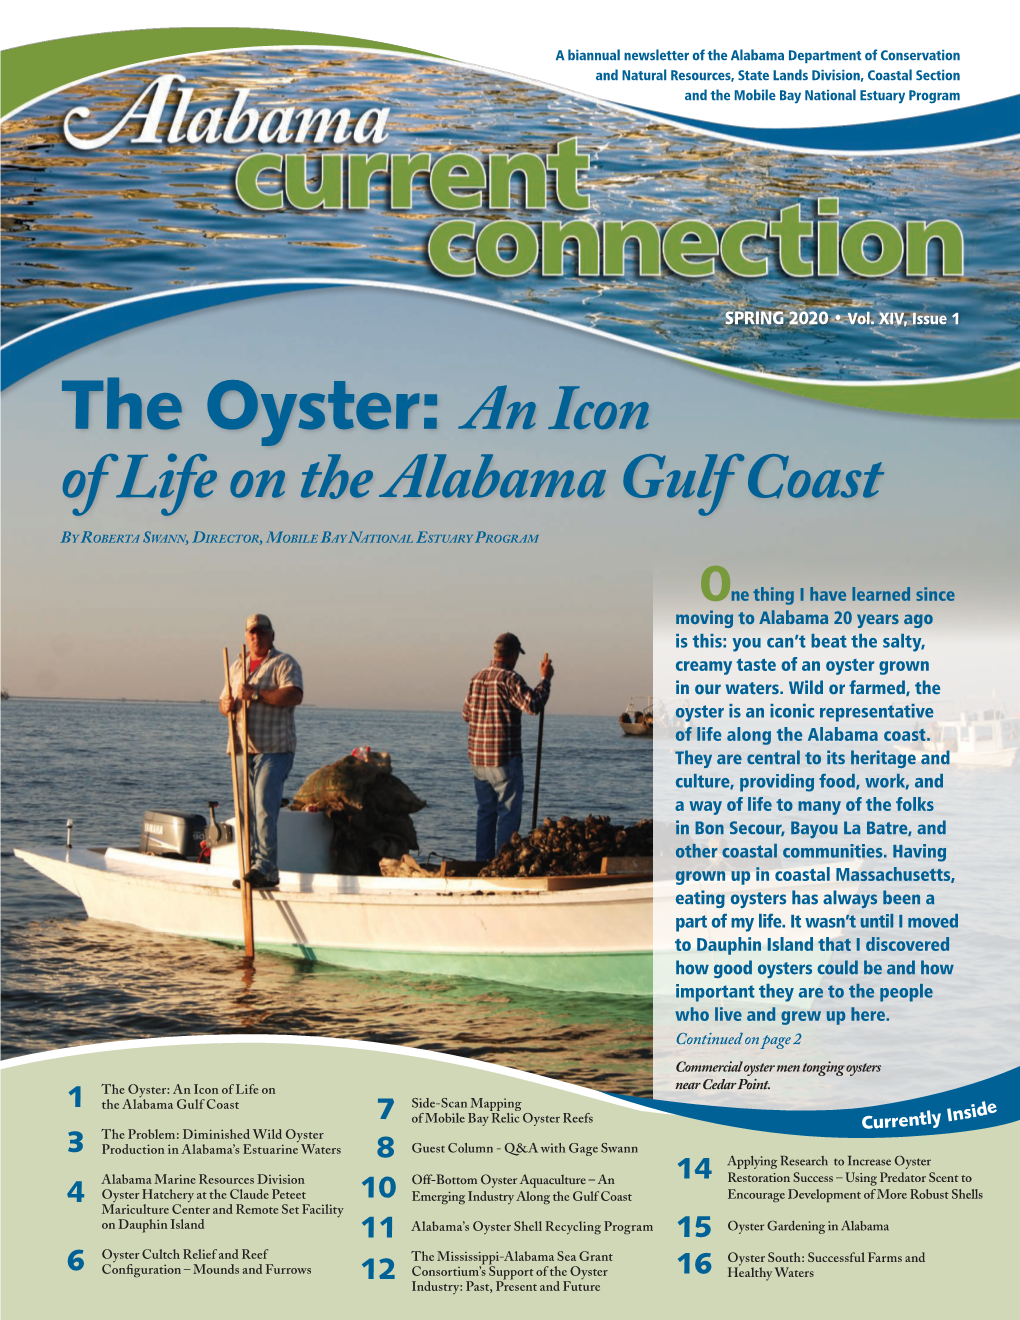 The Oyster: an Icon of Life on the Alabama Gulf Coast